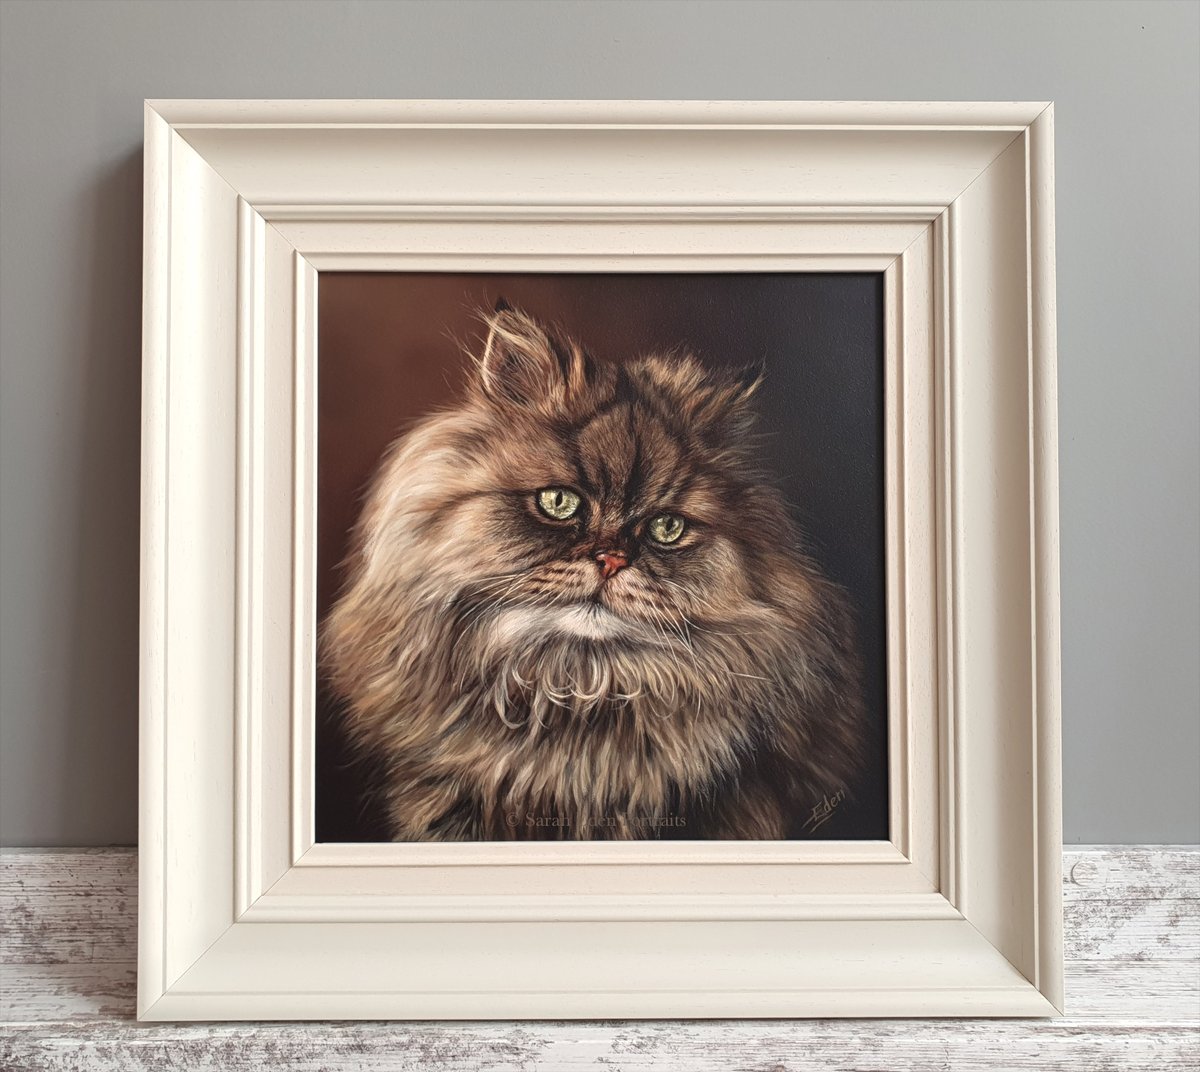 Saying Goodbye to this little guy today as he's about to be gifted as a surprise birthday present. I think the soft cream of this frame really compliments his beautiful fur colouring. 

#cats #longhairedcats #catportrait #catpainting #catoilpainting